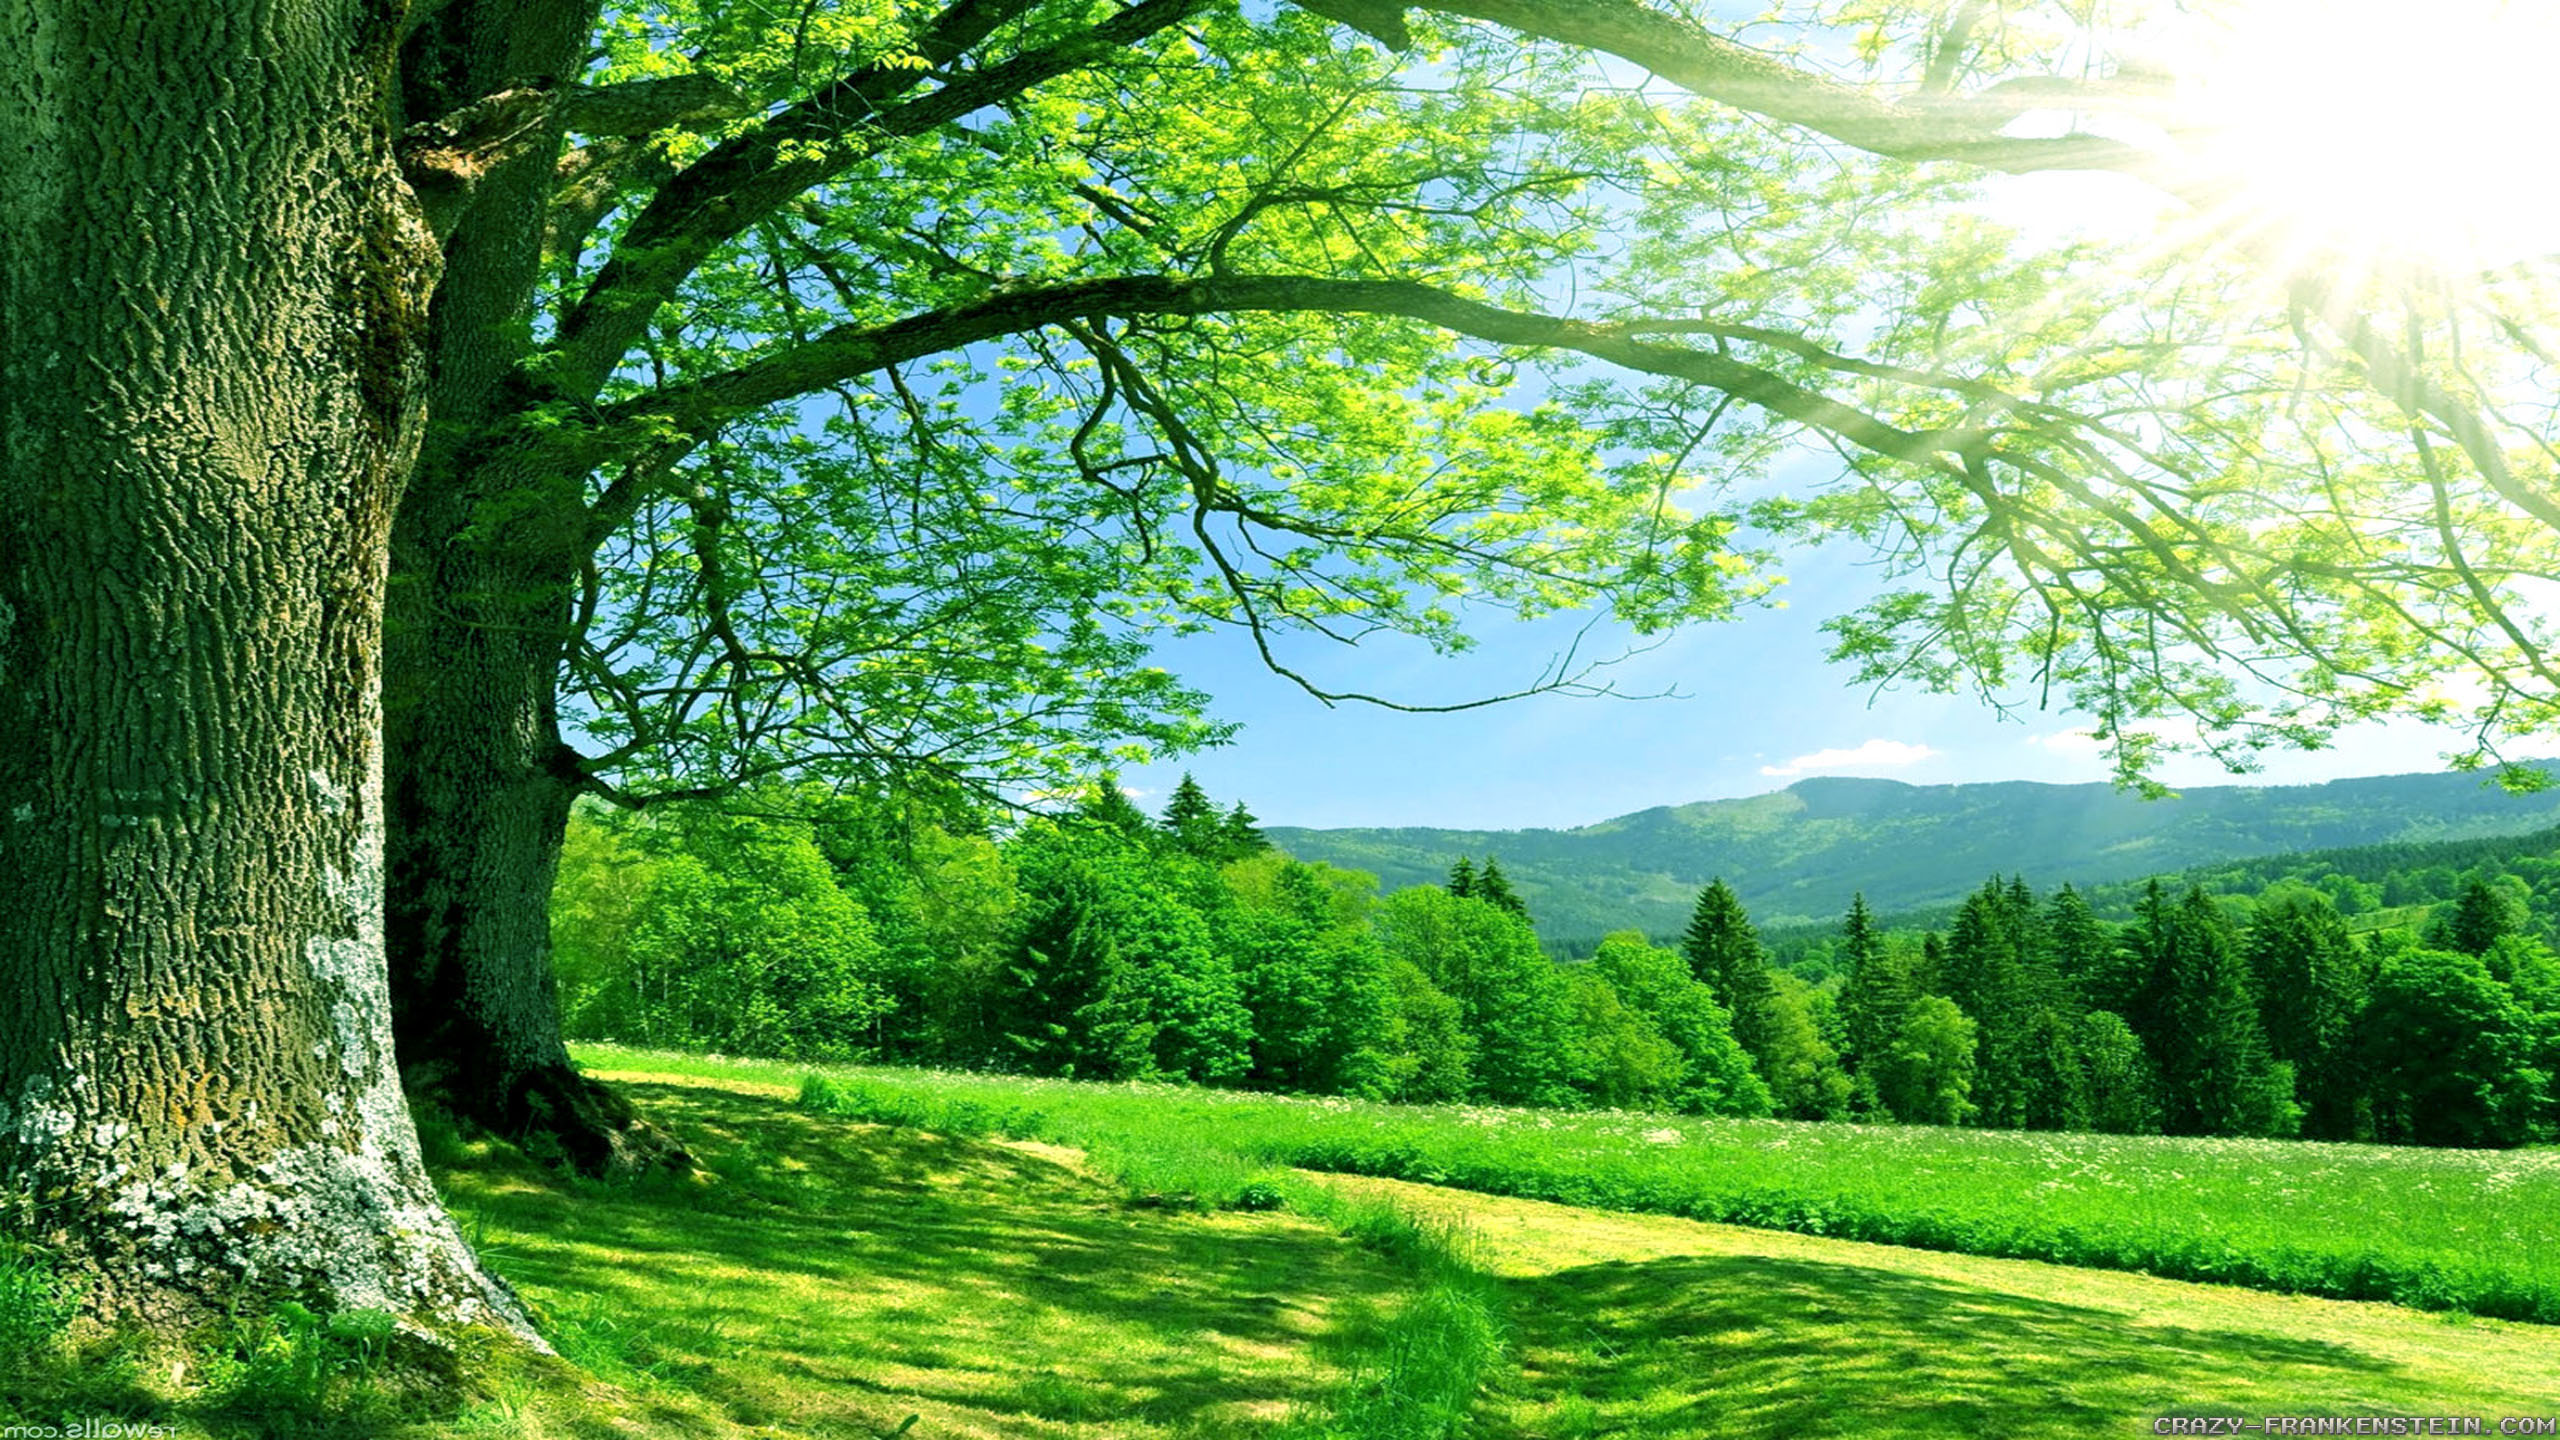 Download Summer Nature Image 2560x1440 Full Hd Wall